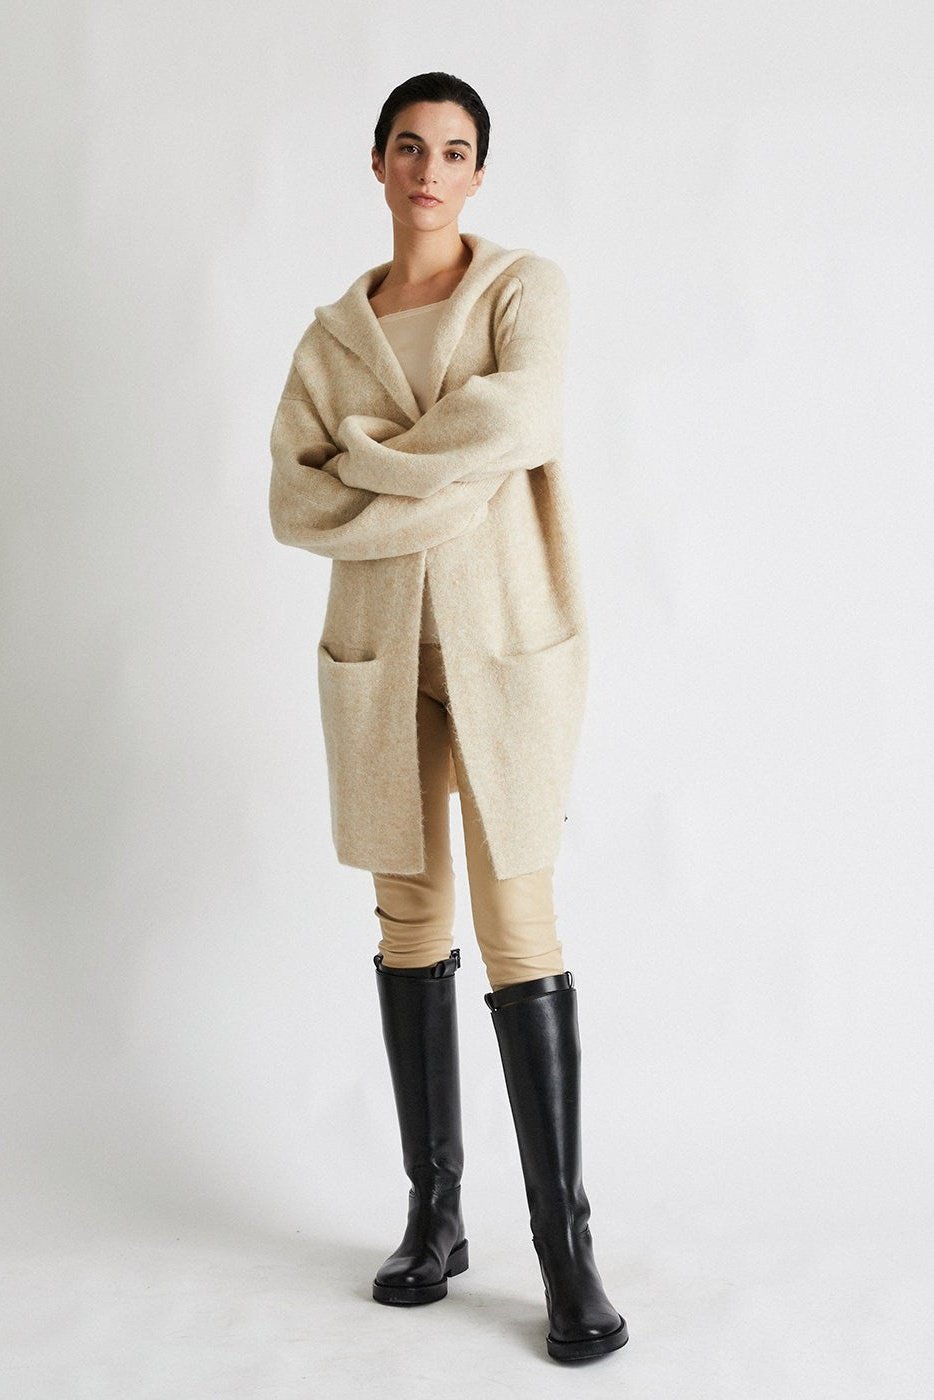 + Beryll Cashmere Cardigan with Hood Vivian | Marshmallow - Oversized Cashmere Cardigan with Hood - +Beryll Worn By Good People